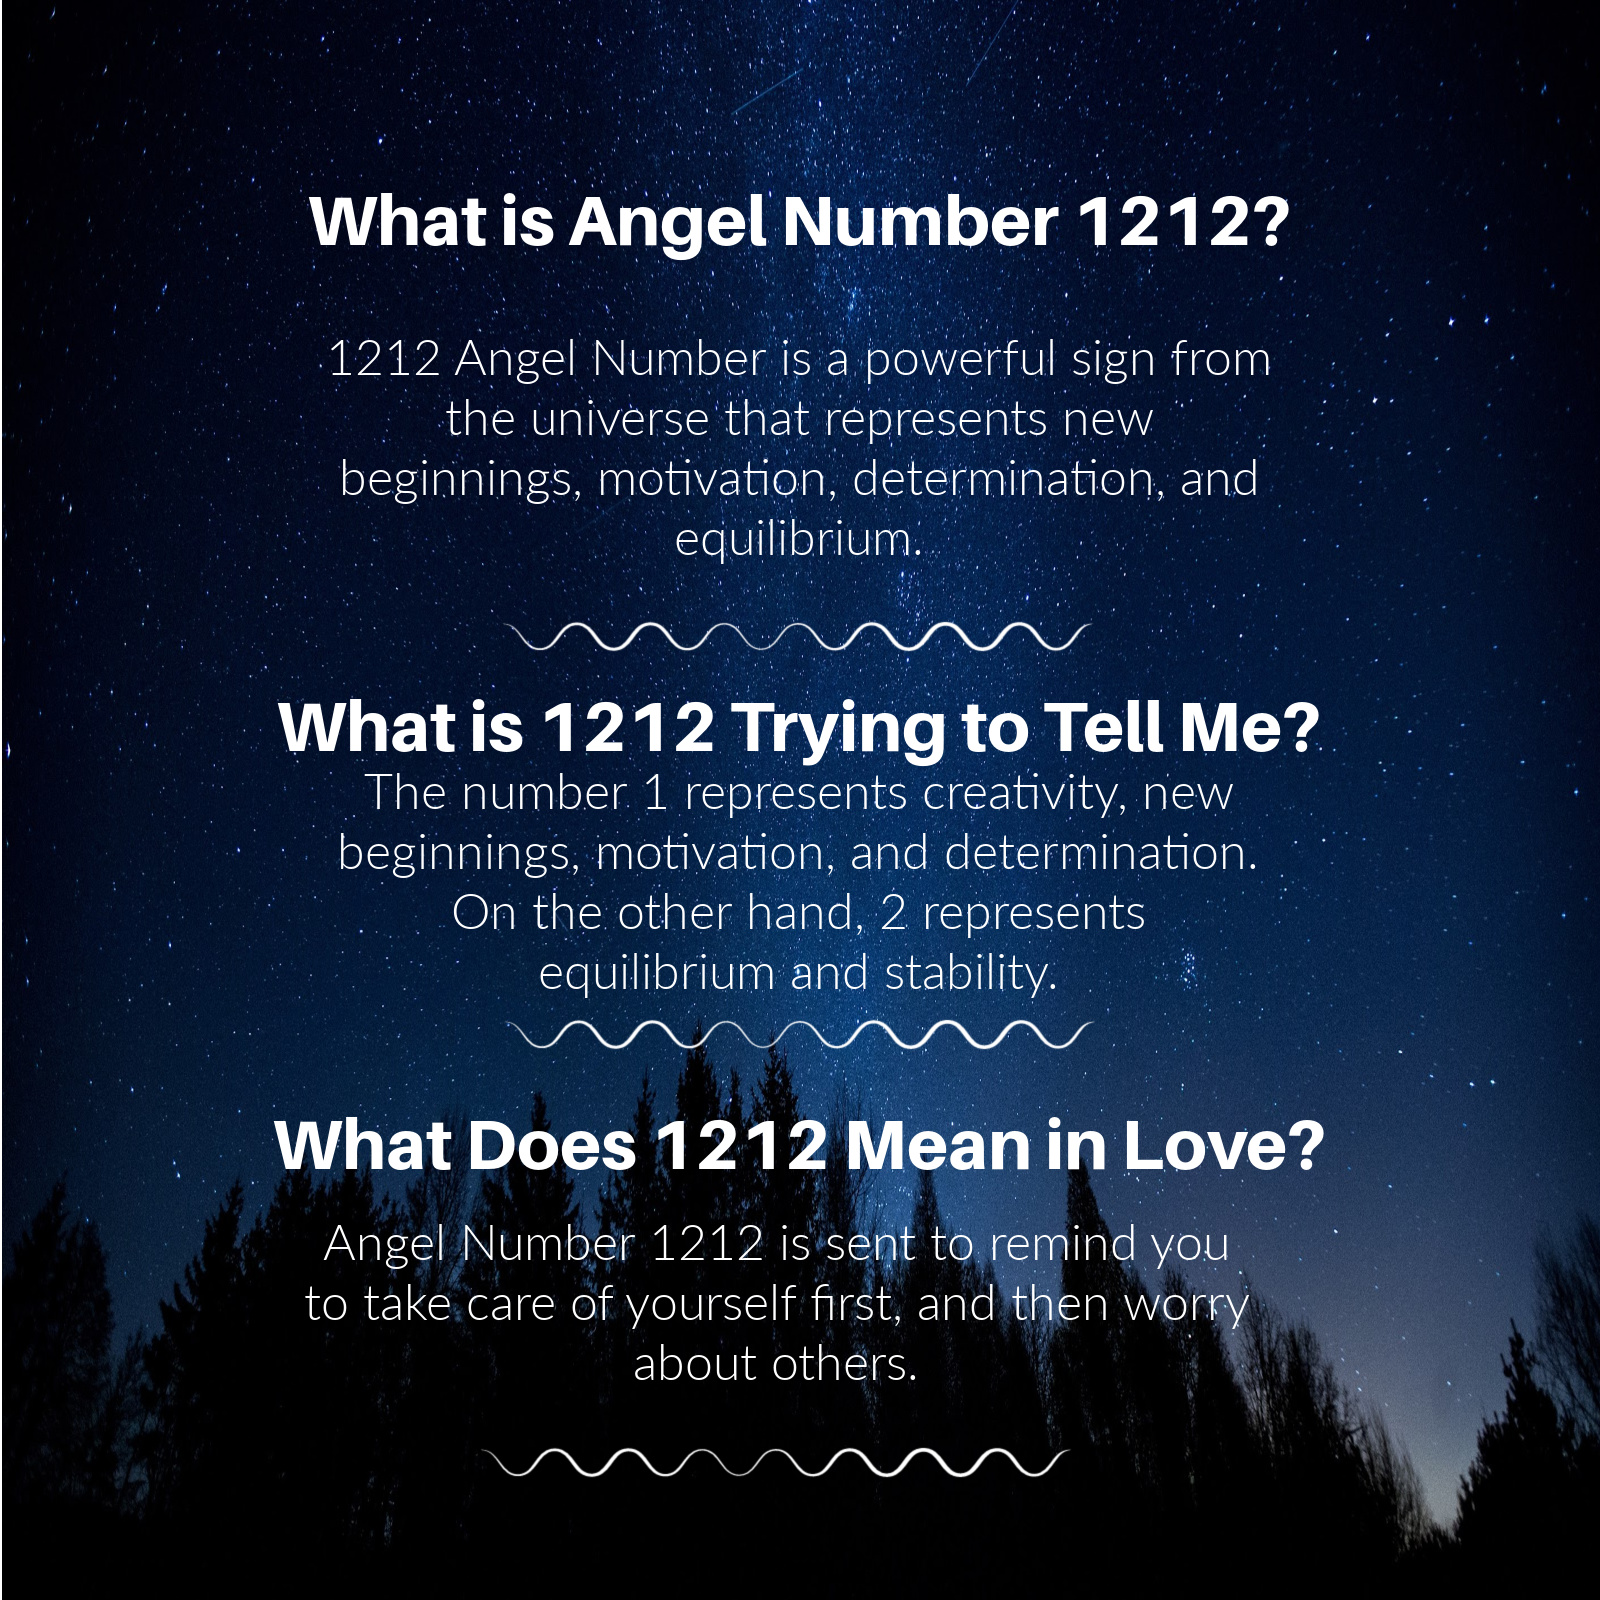 1212 angel number infographic